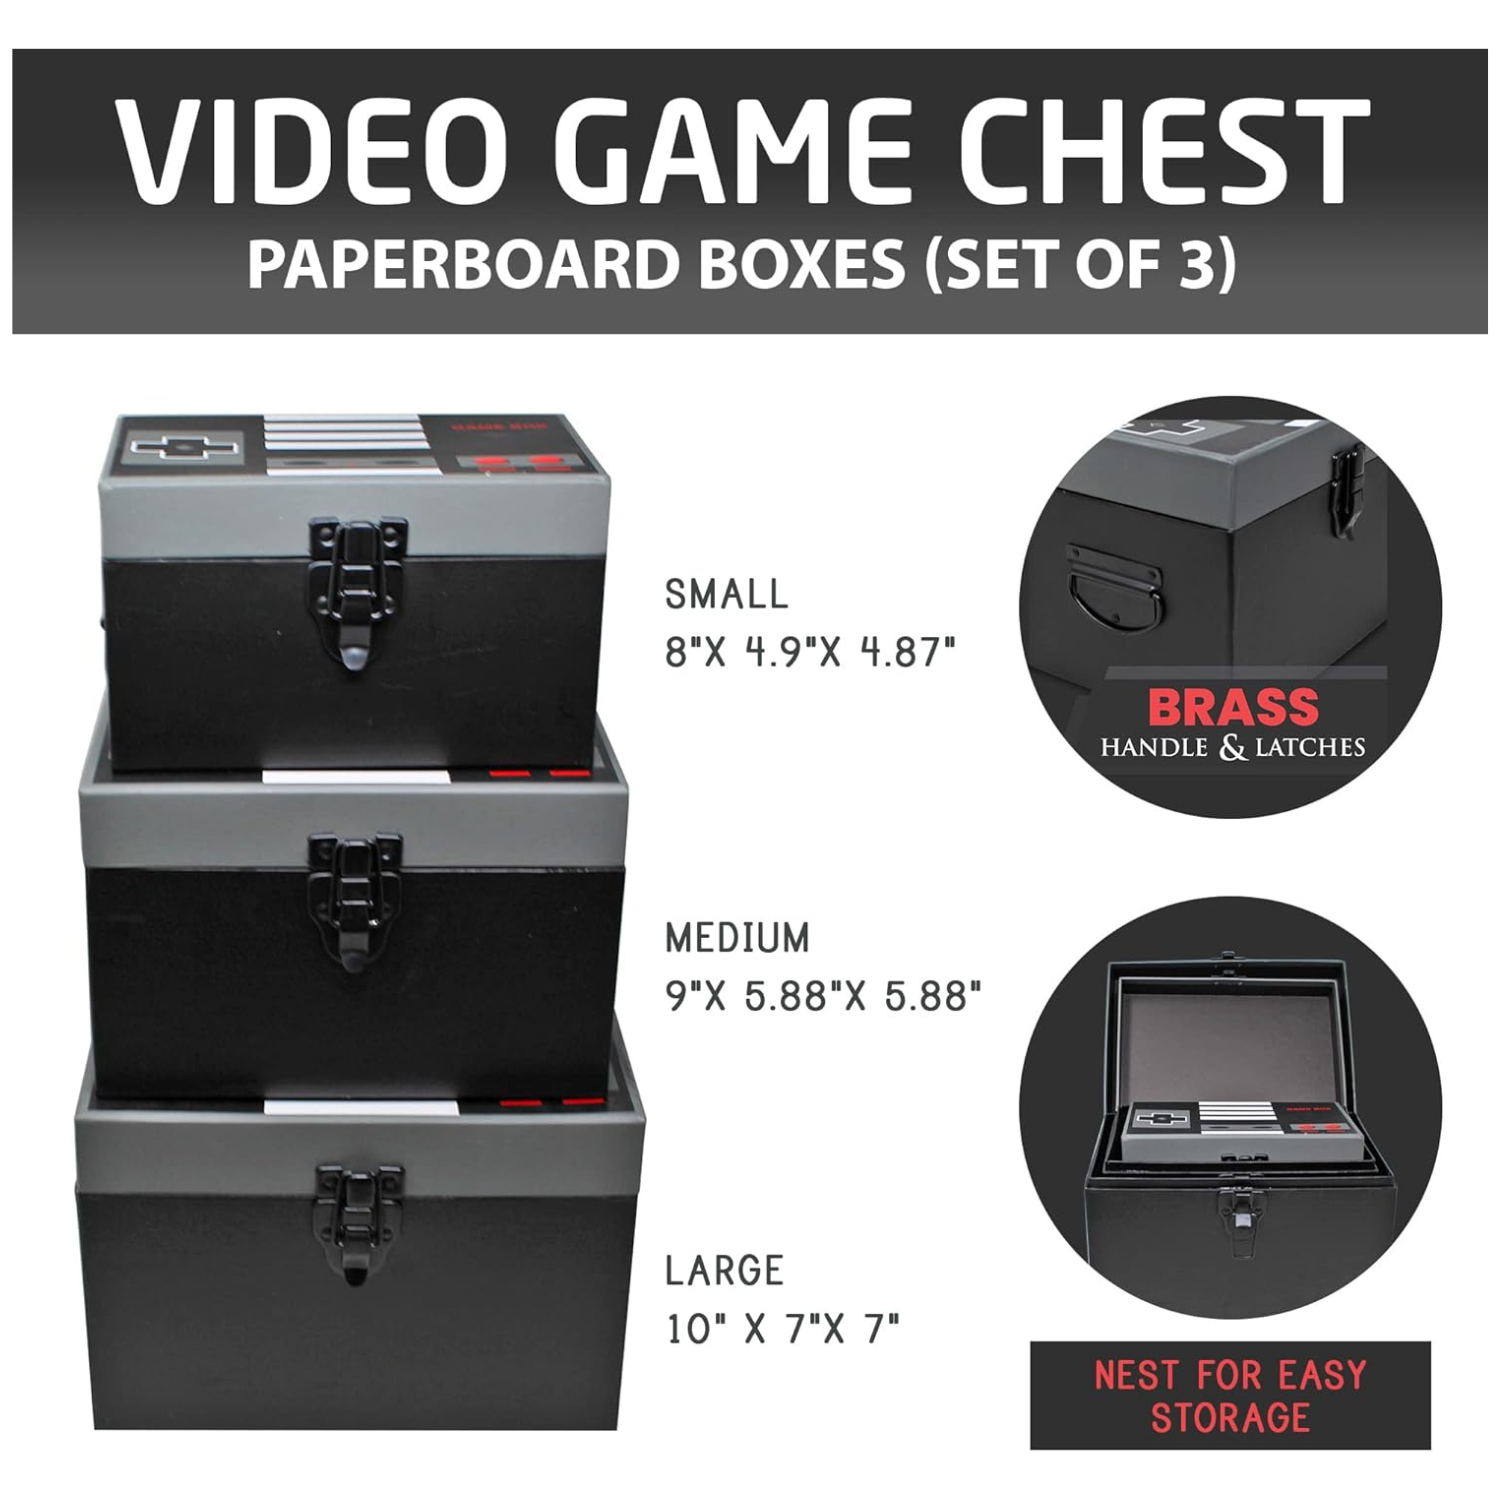 Video Game Chest Paperboard Boxes (Set of 3)